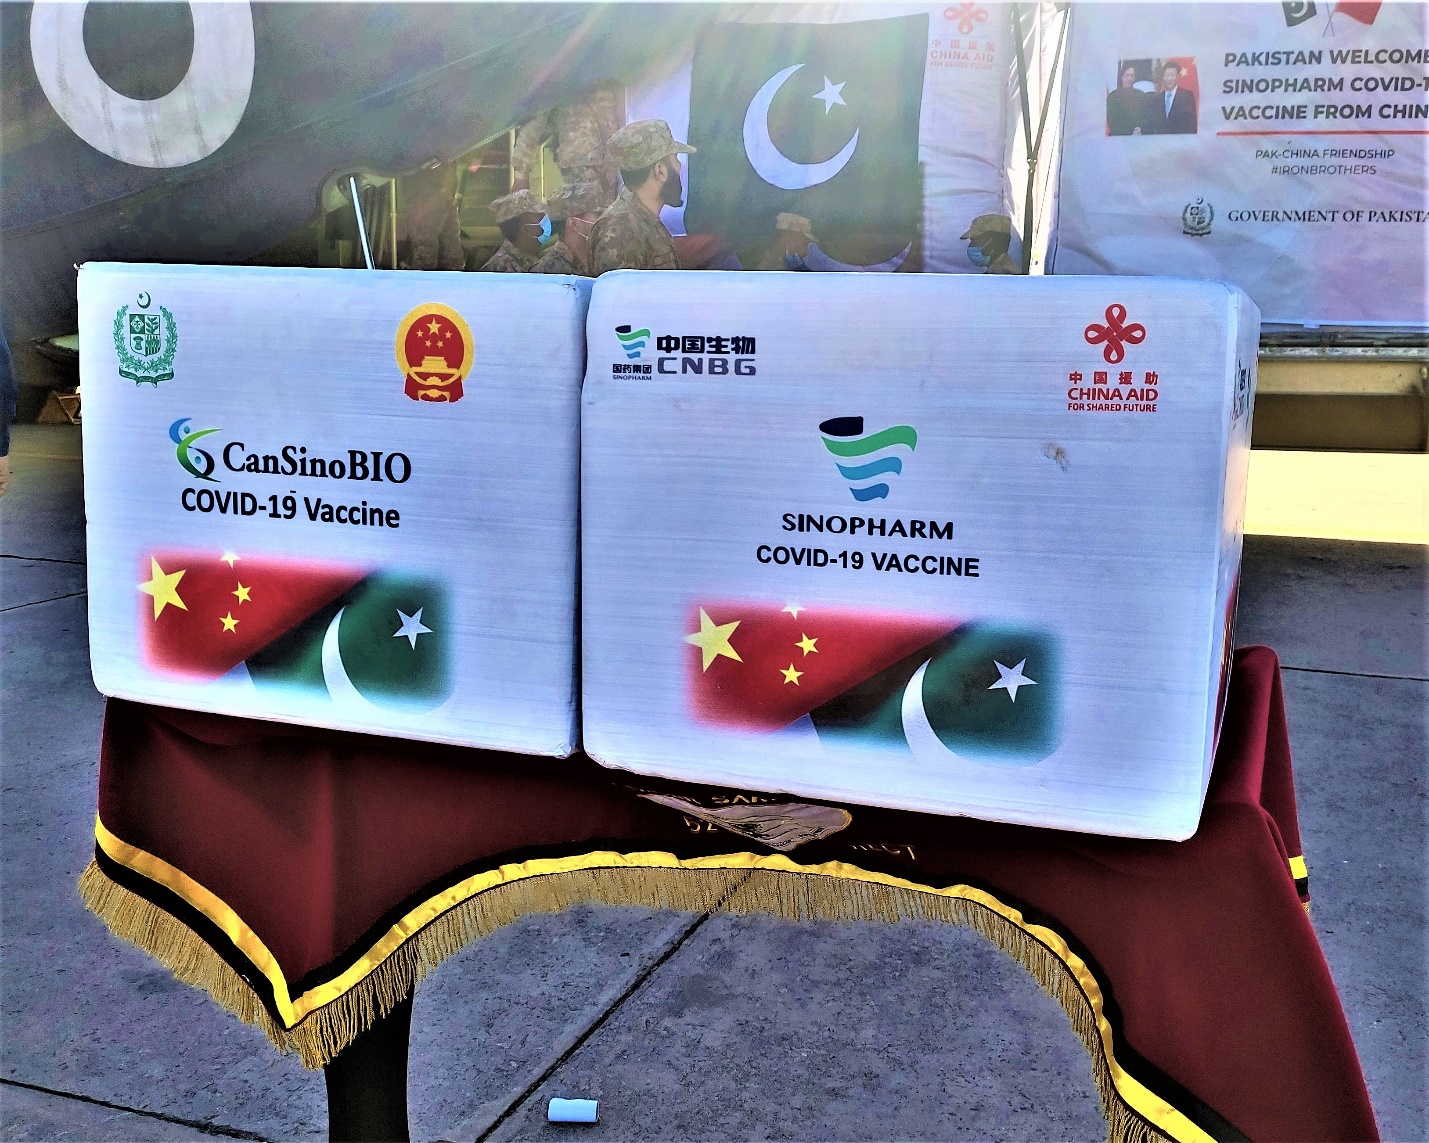 Chinese vaccines play major role in Pakistan’s anti-Covid campaign